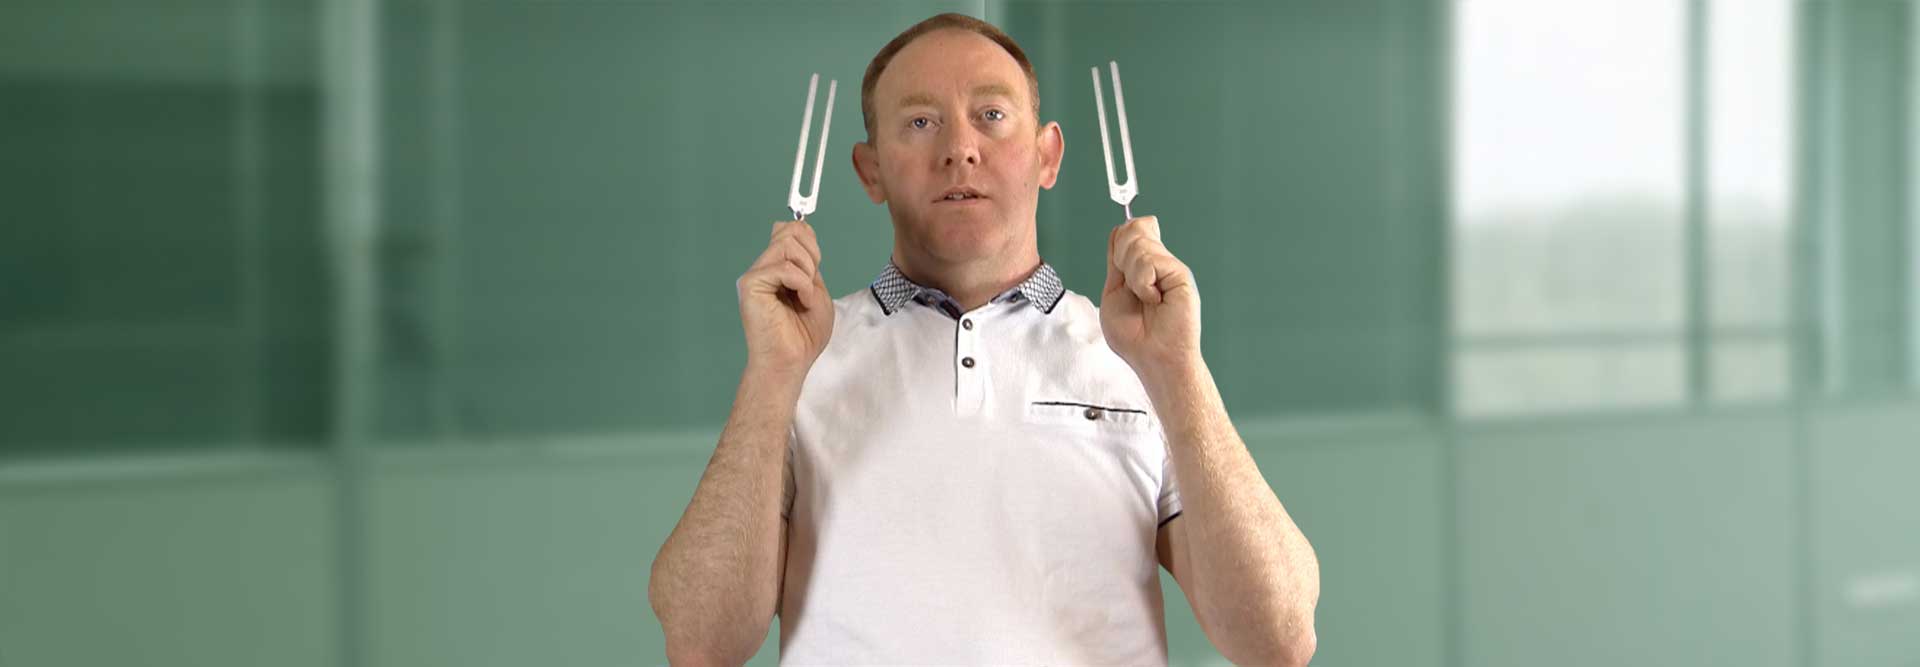 Using Tuning Forks for Self Healing – Energy Healing Online Training Course